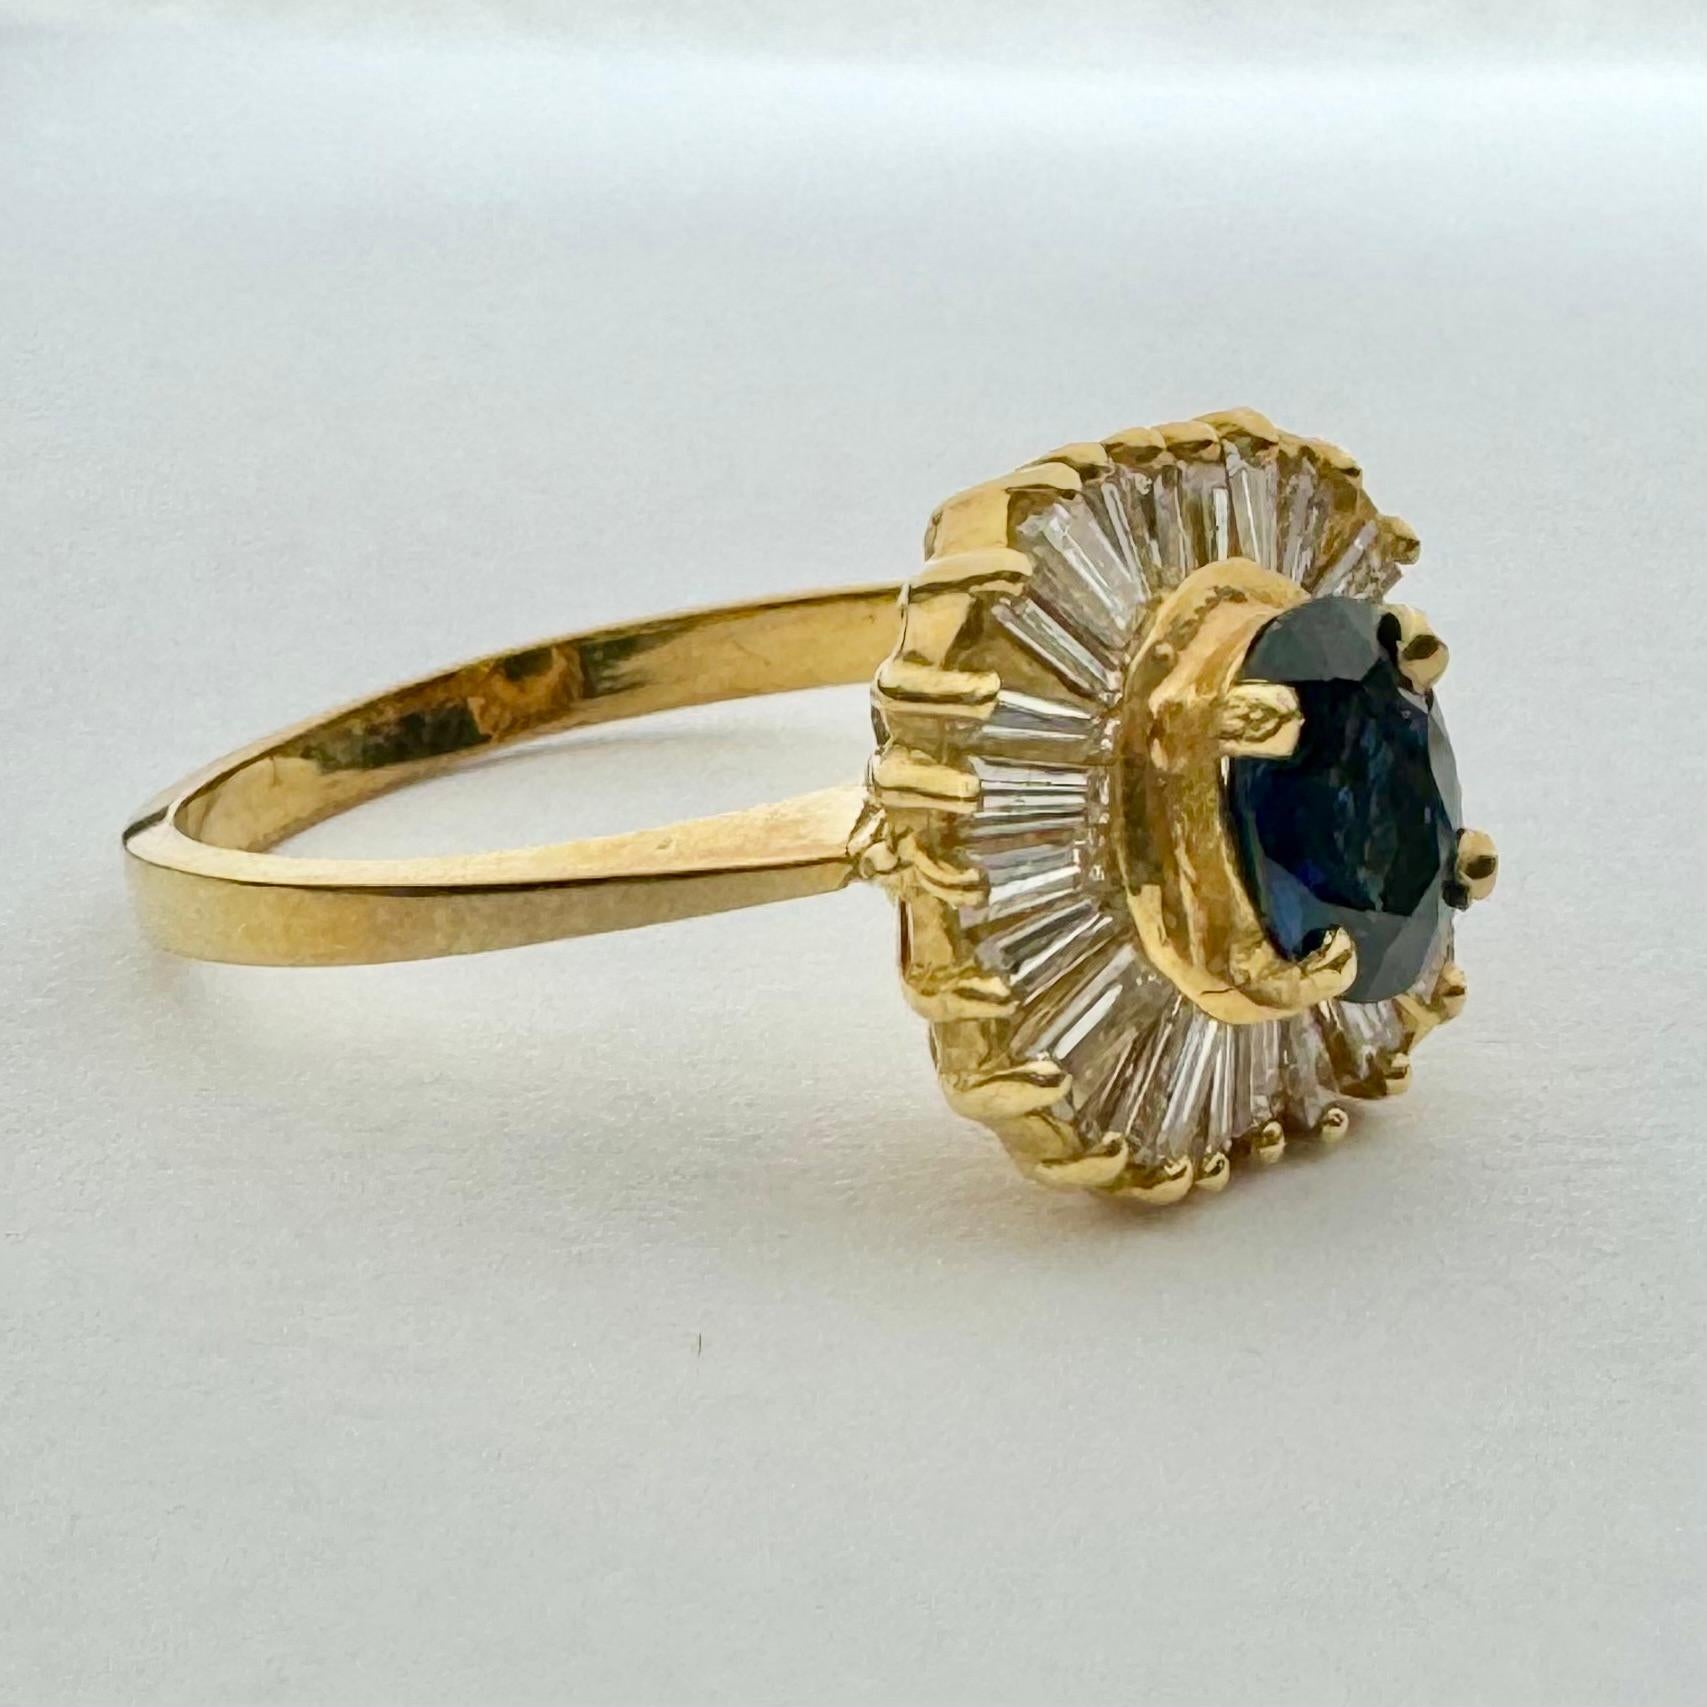 Beautiful vintage sapphire and and diamond ring in 18k yellow gold.
Surrounding a beautiful rich blue sapphire are dazzling tapered baguette diamonds, delicately arranged in a gorgeous and dynamic halo, similar to the rise and fall of a ballerina's